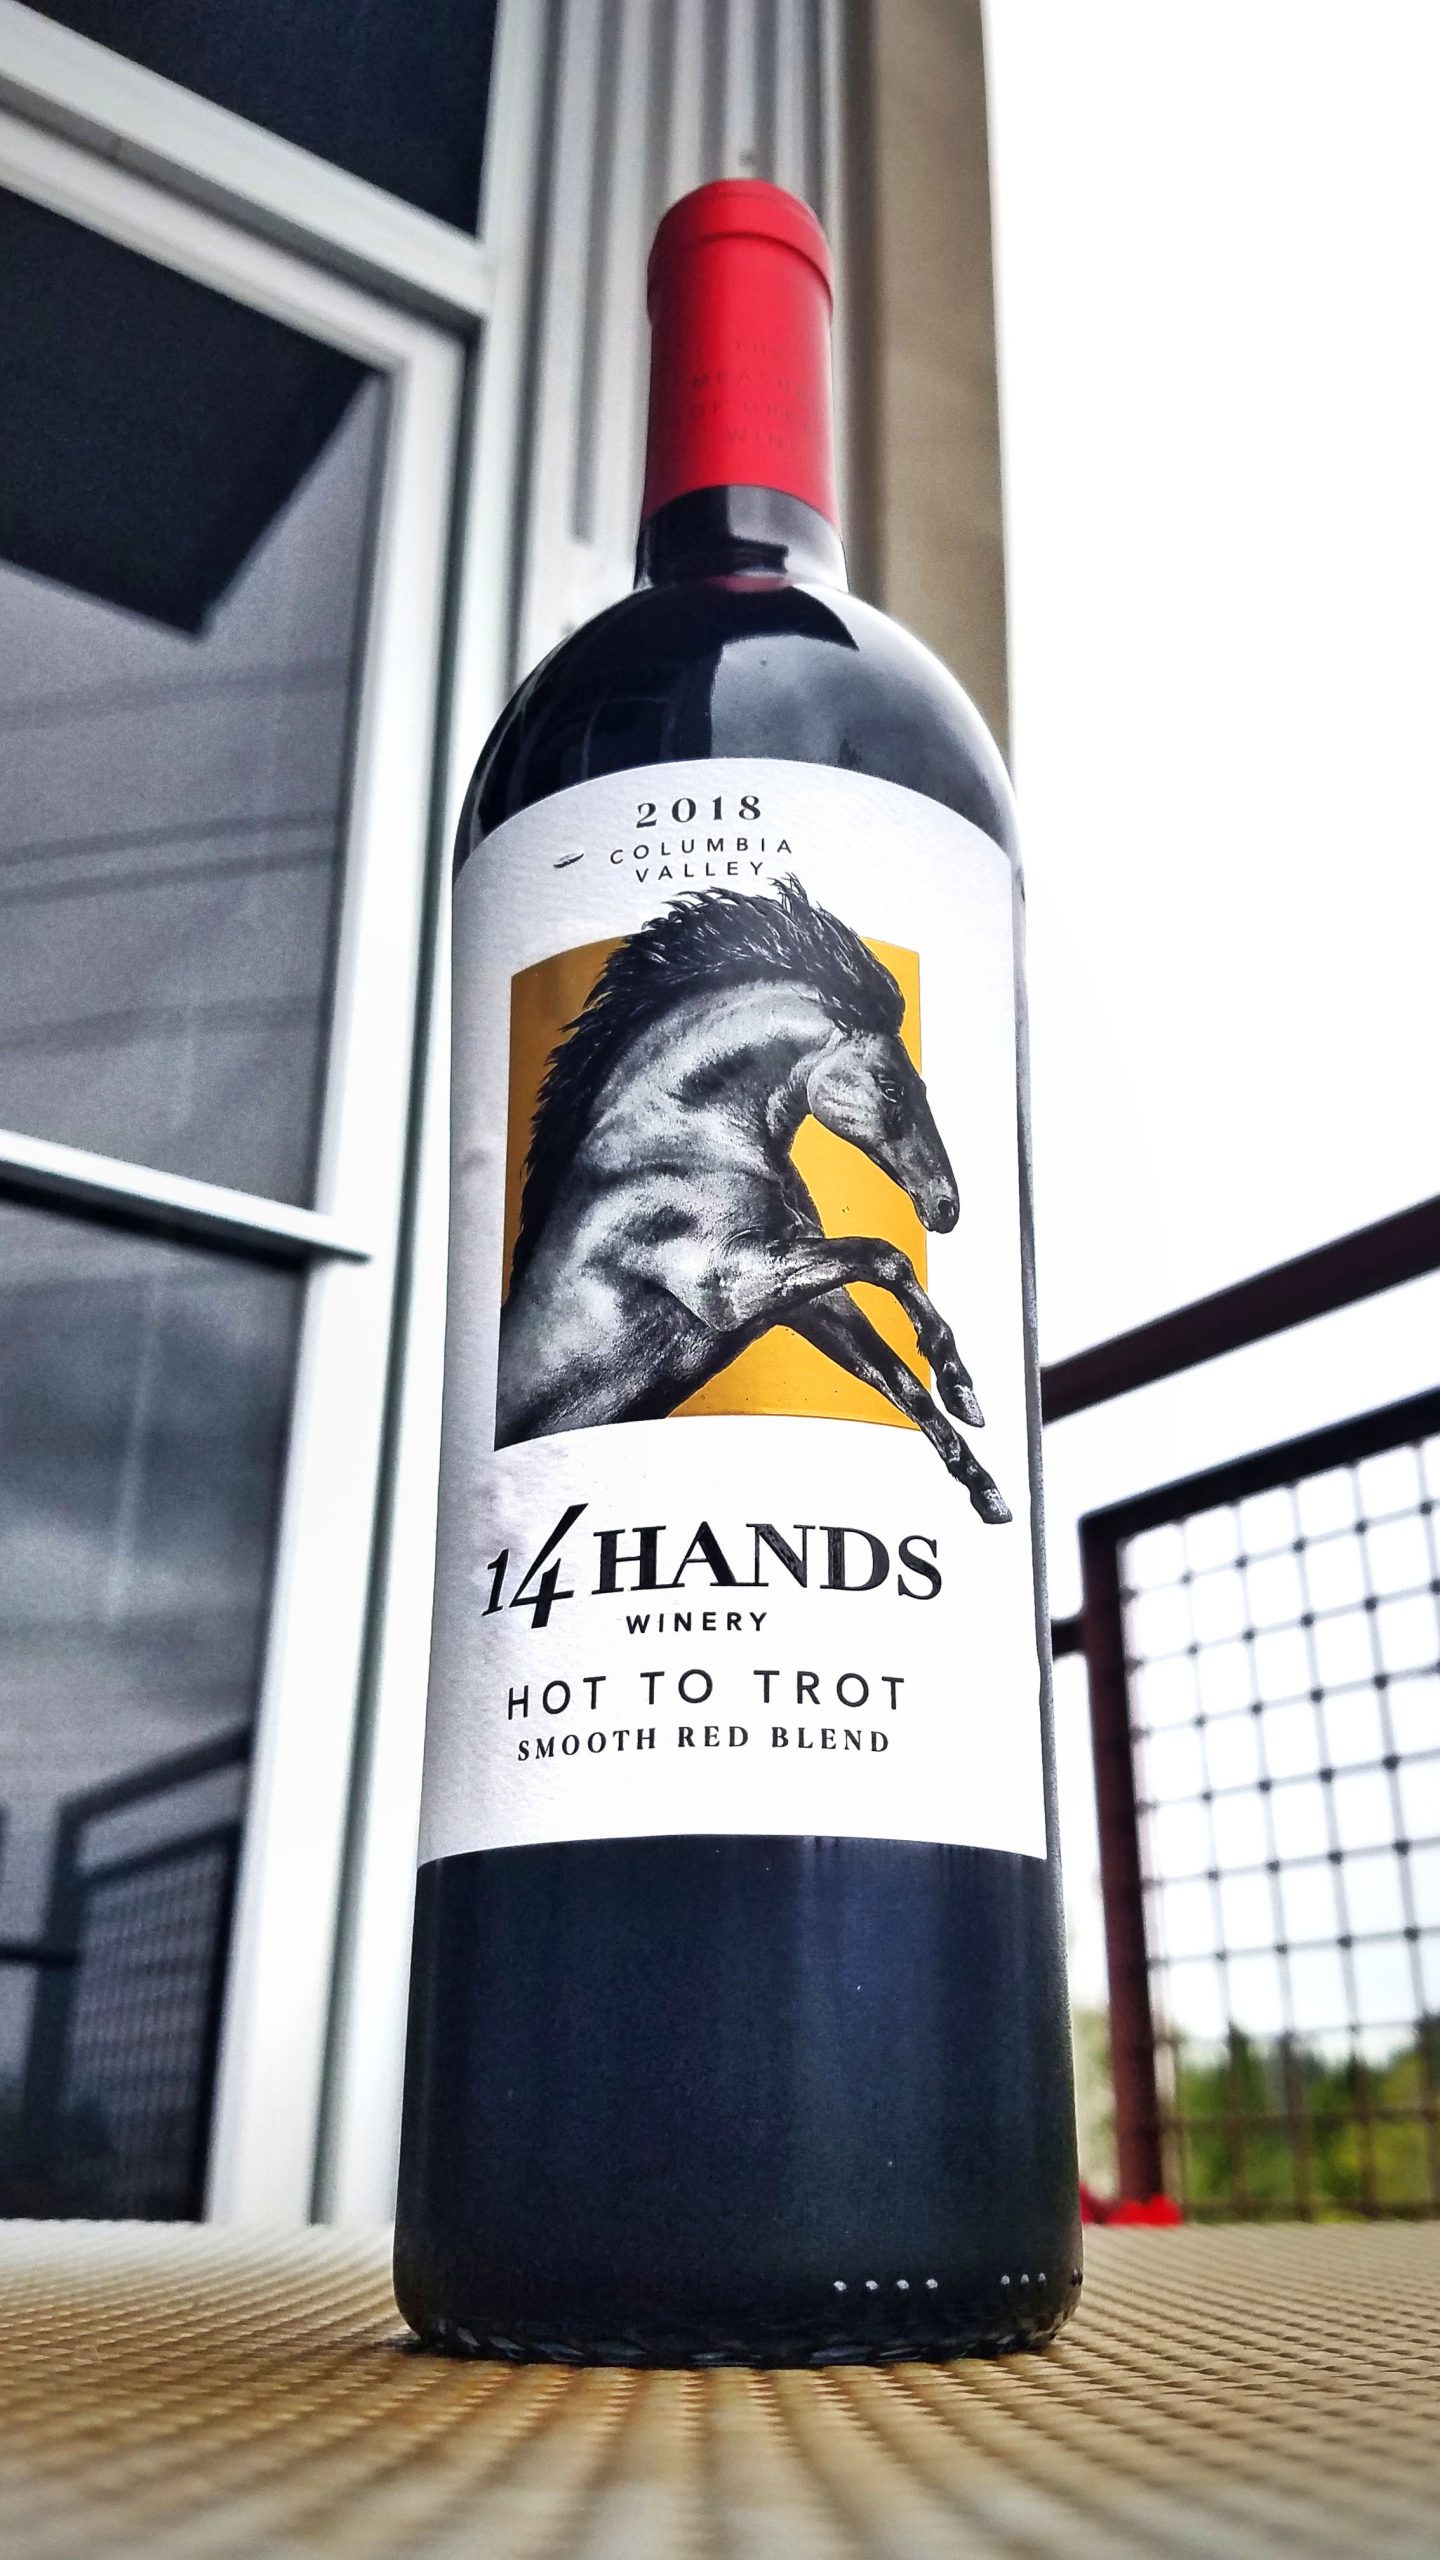 14 Hands Hot to Trot Red Blend 2018